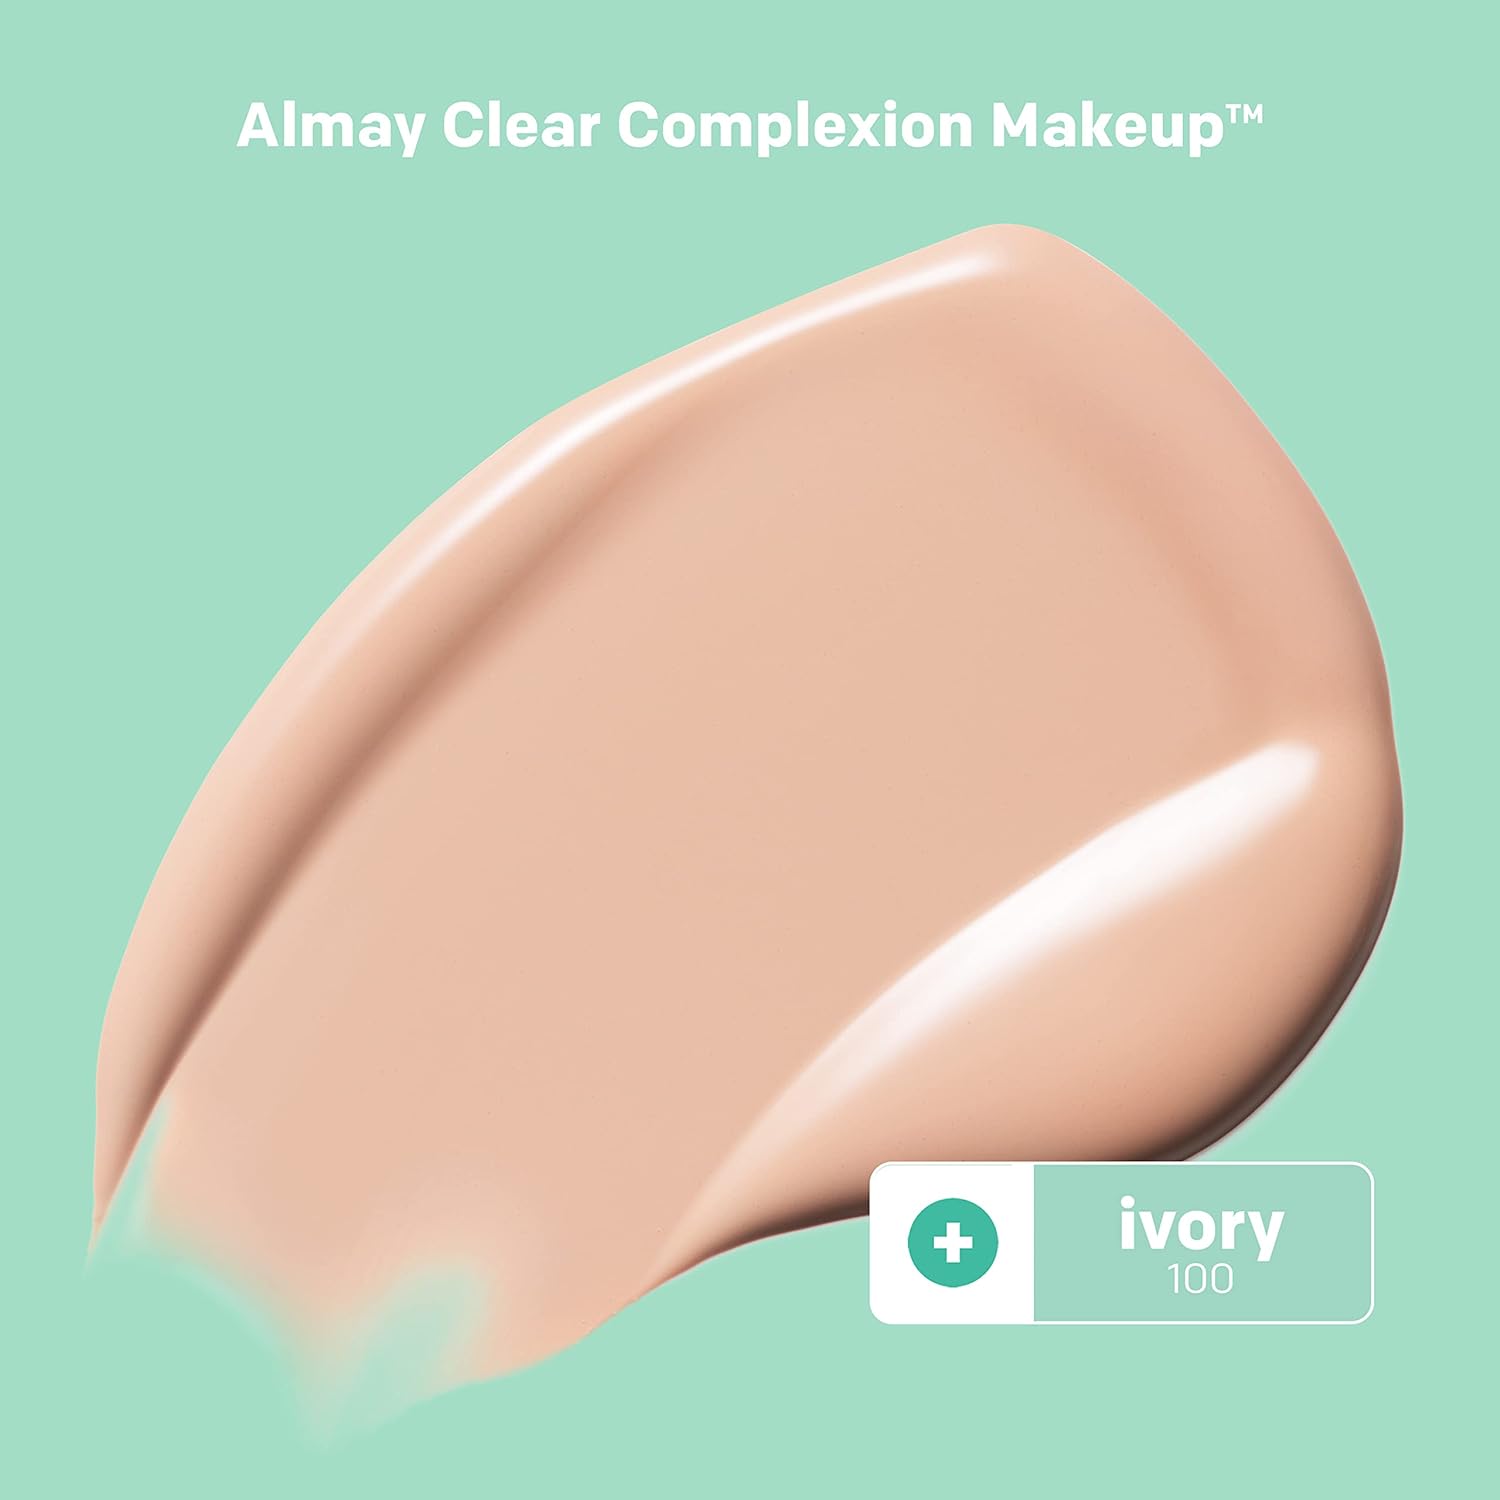 Almay Clear Complexion Acne Foundation Makeup with Salicylic Acid - Lightweight, Medium Coverage, Hypoallergenic-Fragrance Free, for Sensitive Skin , 100 Ivory, 1